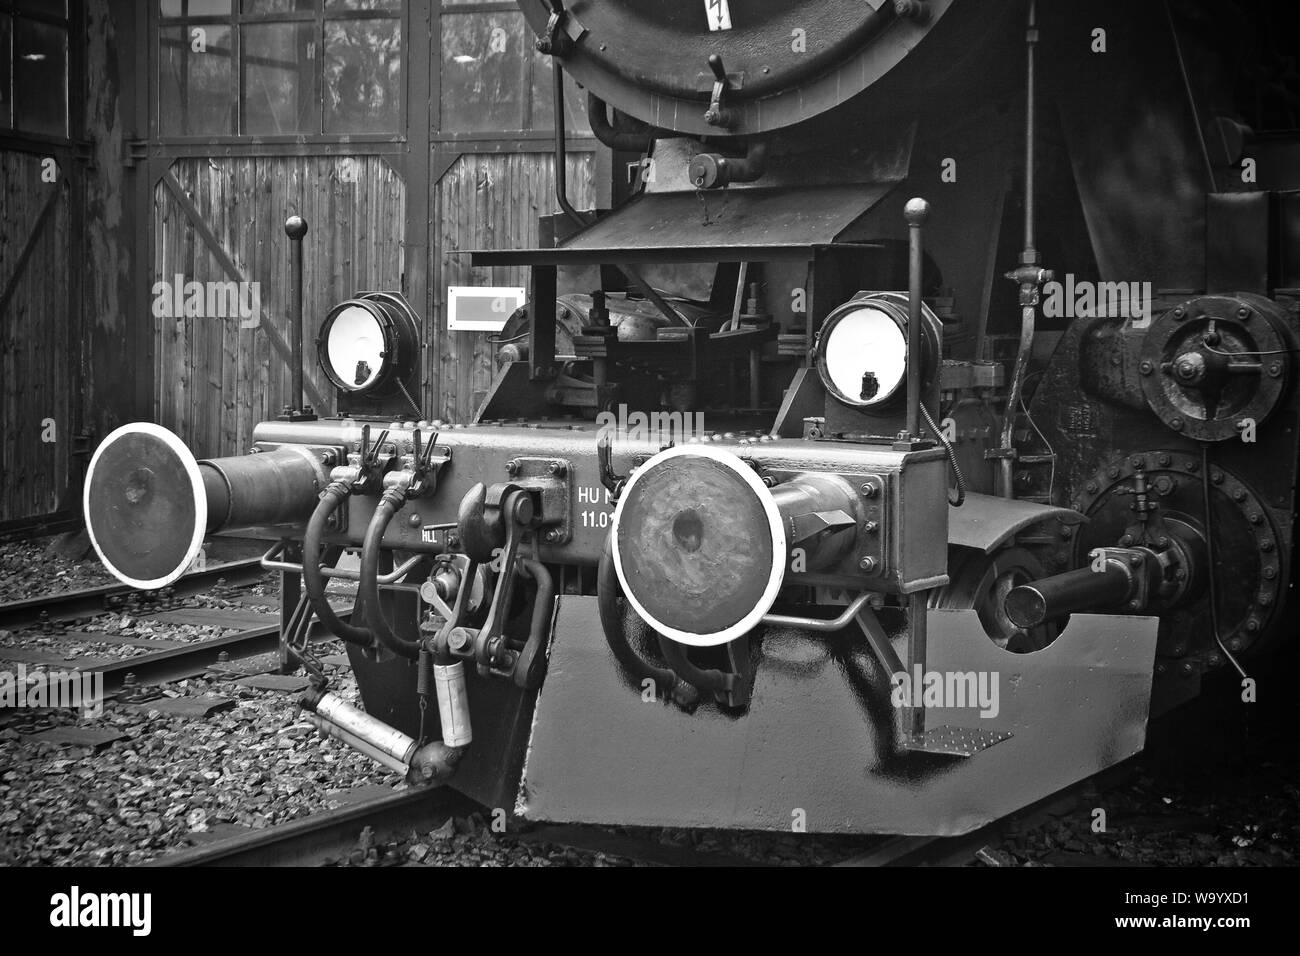 Old retro steam locomotive in a depot Stock Photo